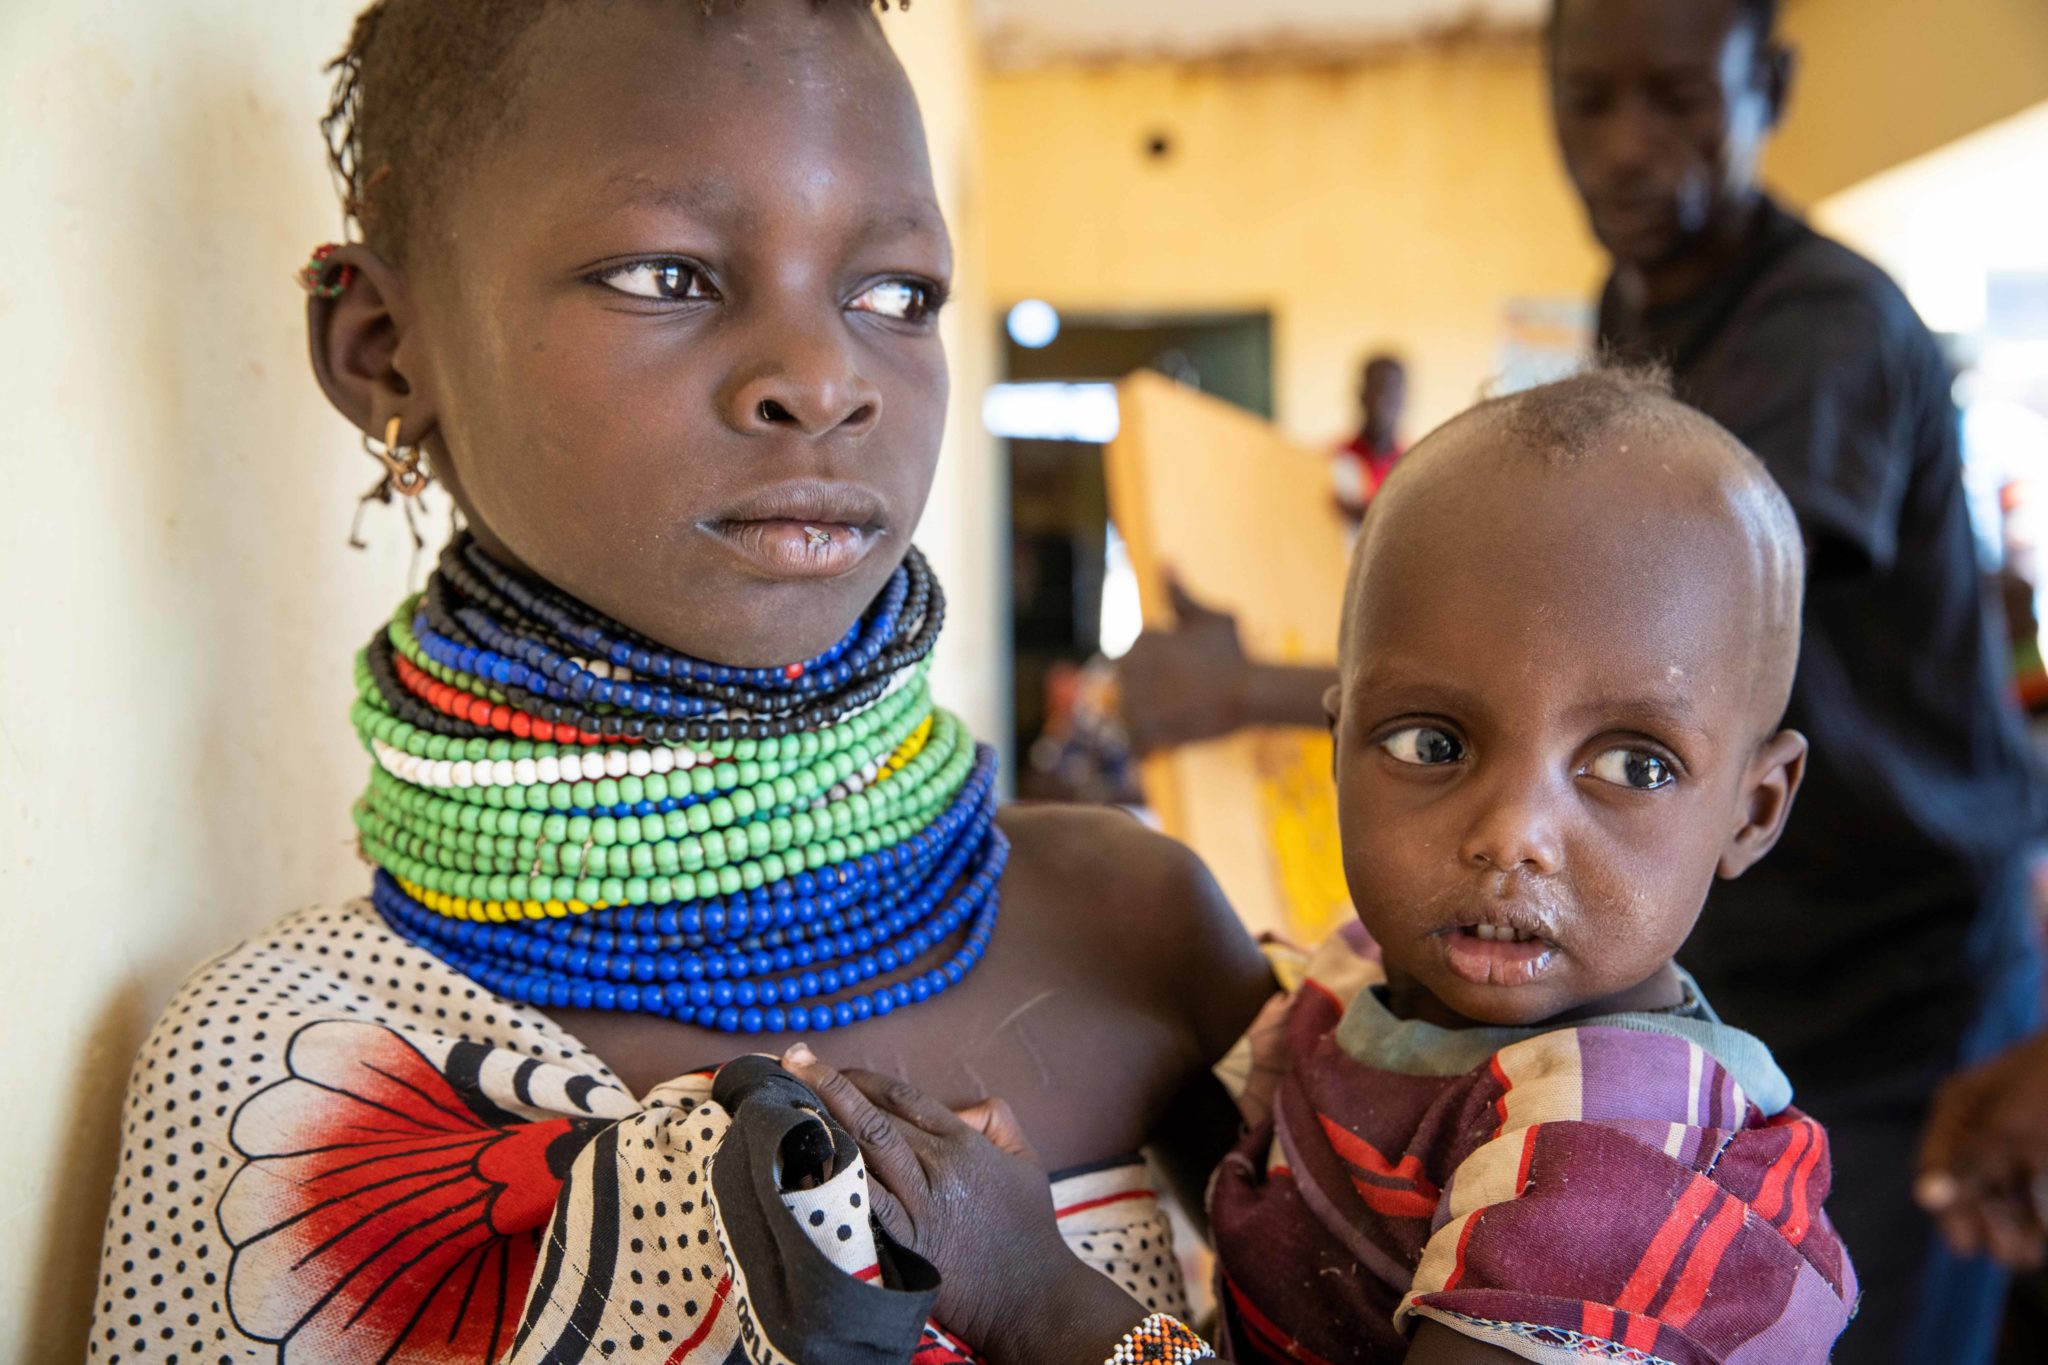 Ngirethi Ekakutan (L) holds her younger sister, Mary Ekakutan (R), as they wait to be seen at a malnutrition clinic in Lekwasimyen in Northern Kenya's Turkana province on 28th June 2022